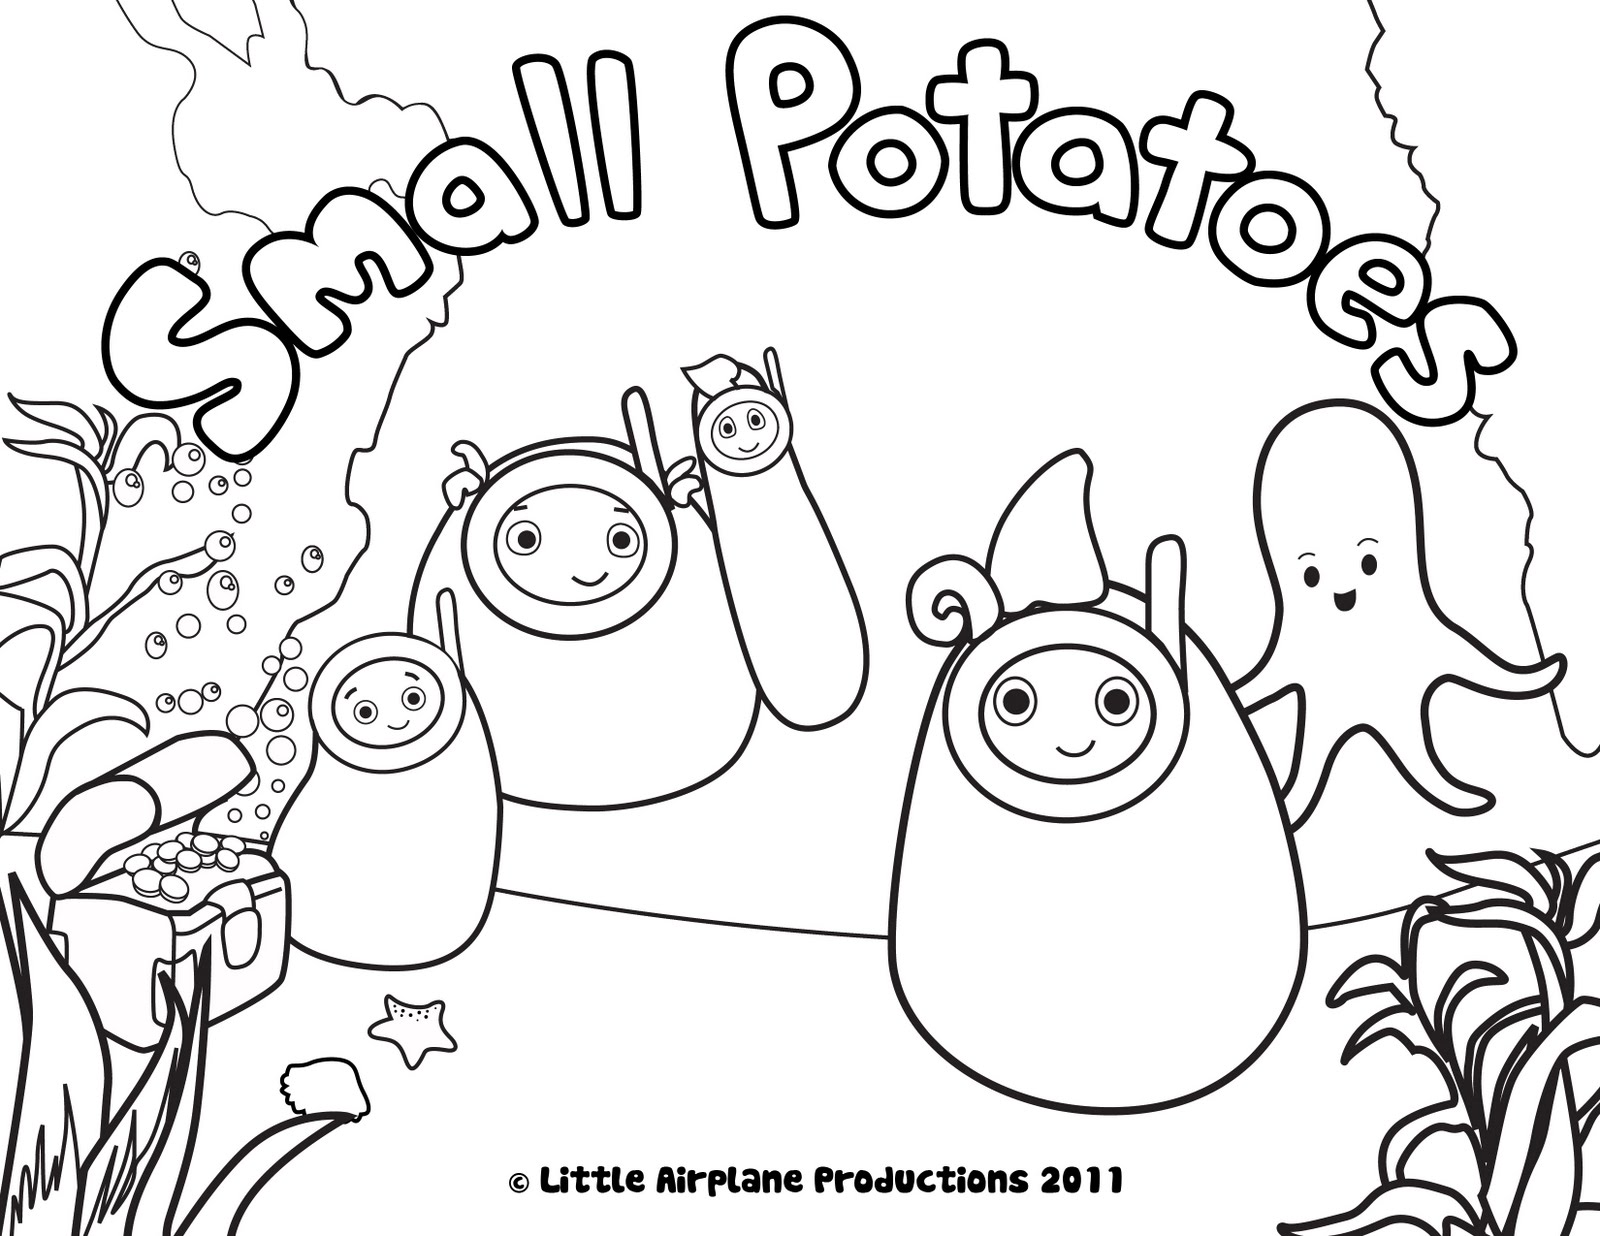 Erica Kepler Small Potatoes Coloring Pages